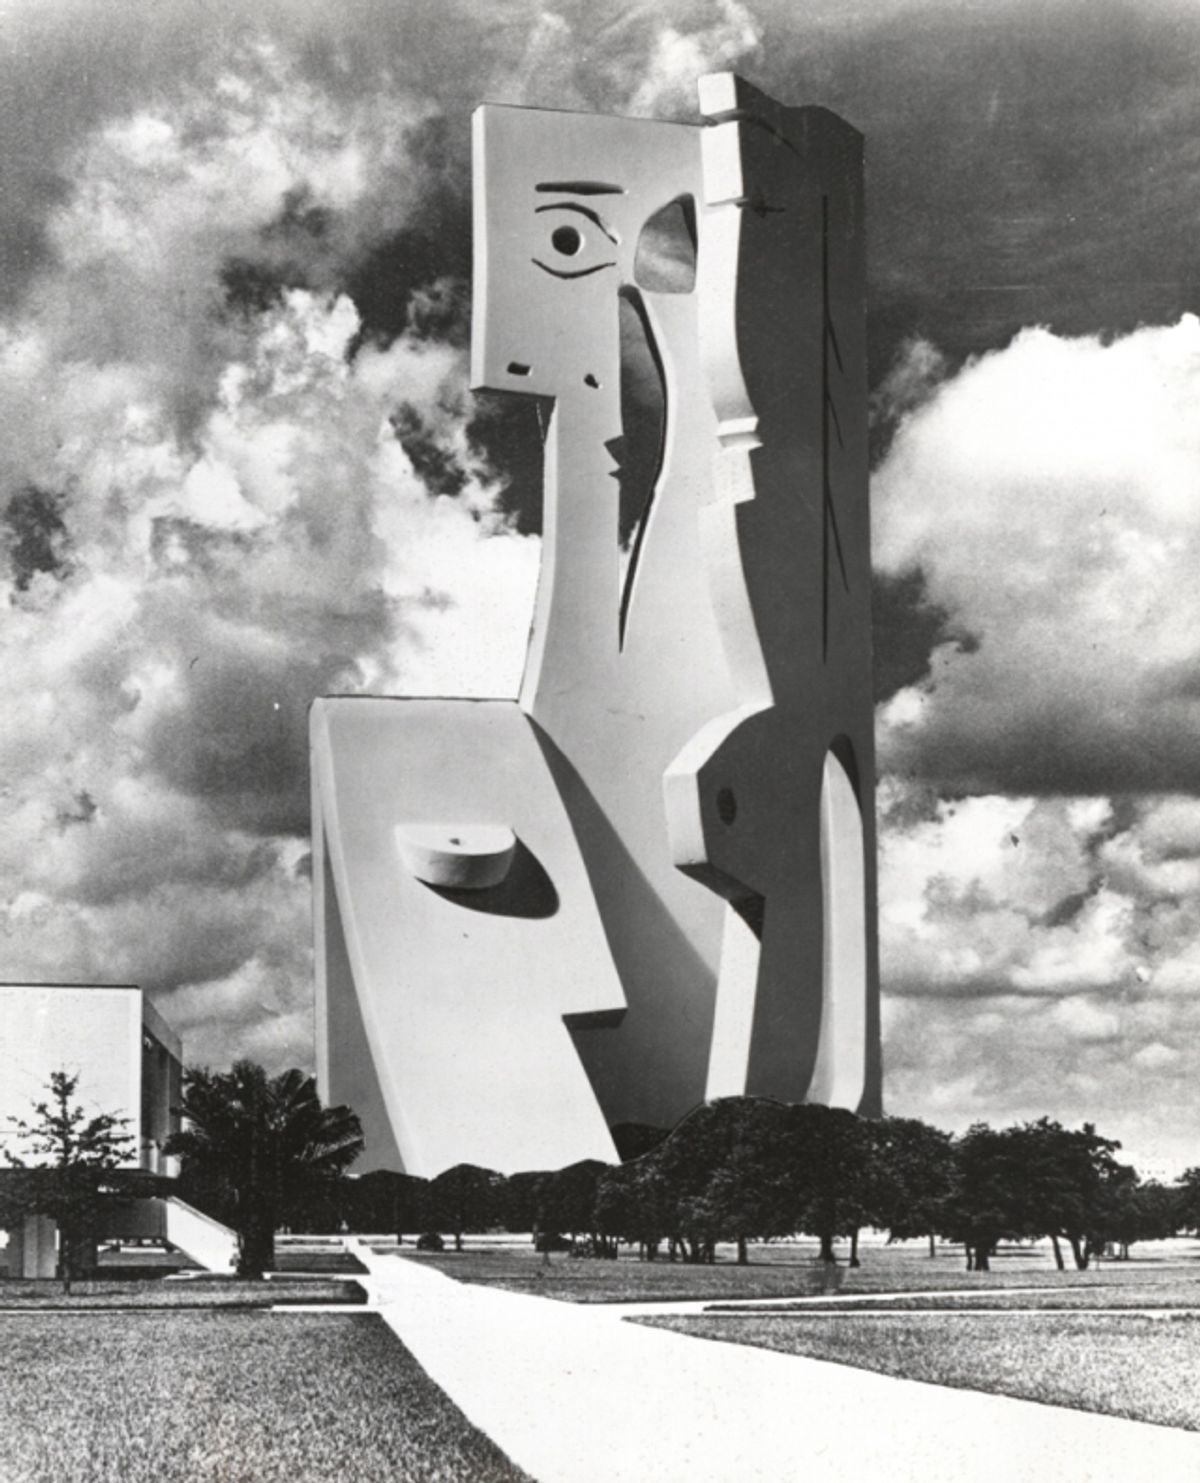 Photomontage of design for Bust of a Woman at the USF campus made by Picasso's collaborator Carl Nesjar in 1971 USF Center for Virtualization and Applied Spatial Technologies/ Advanced Visualization Center